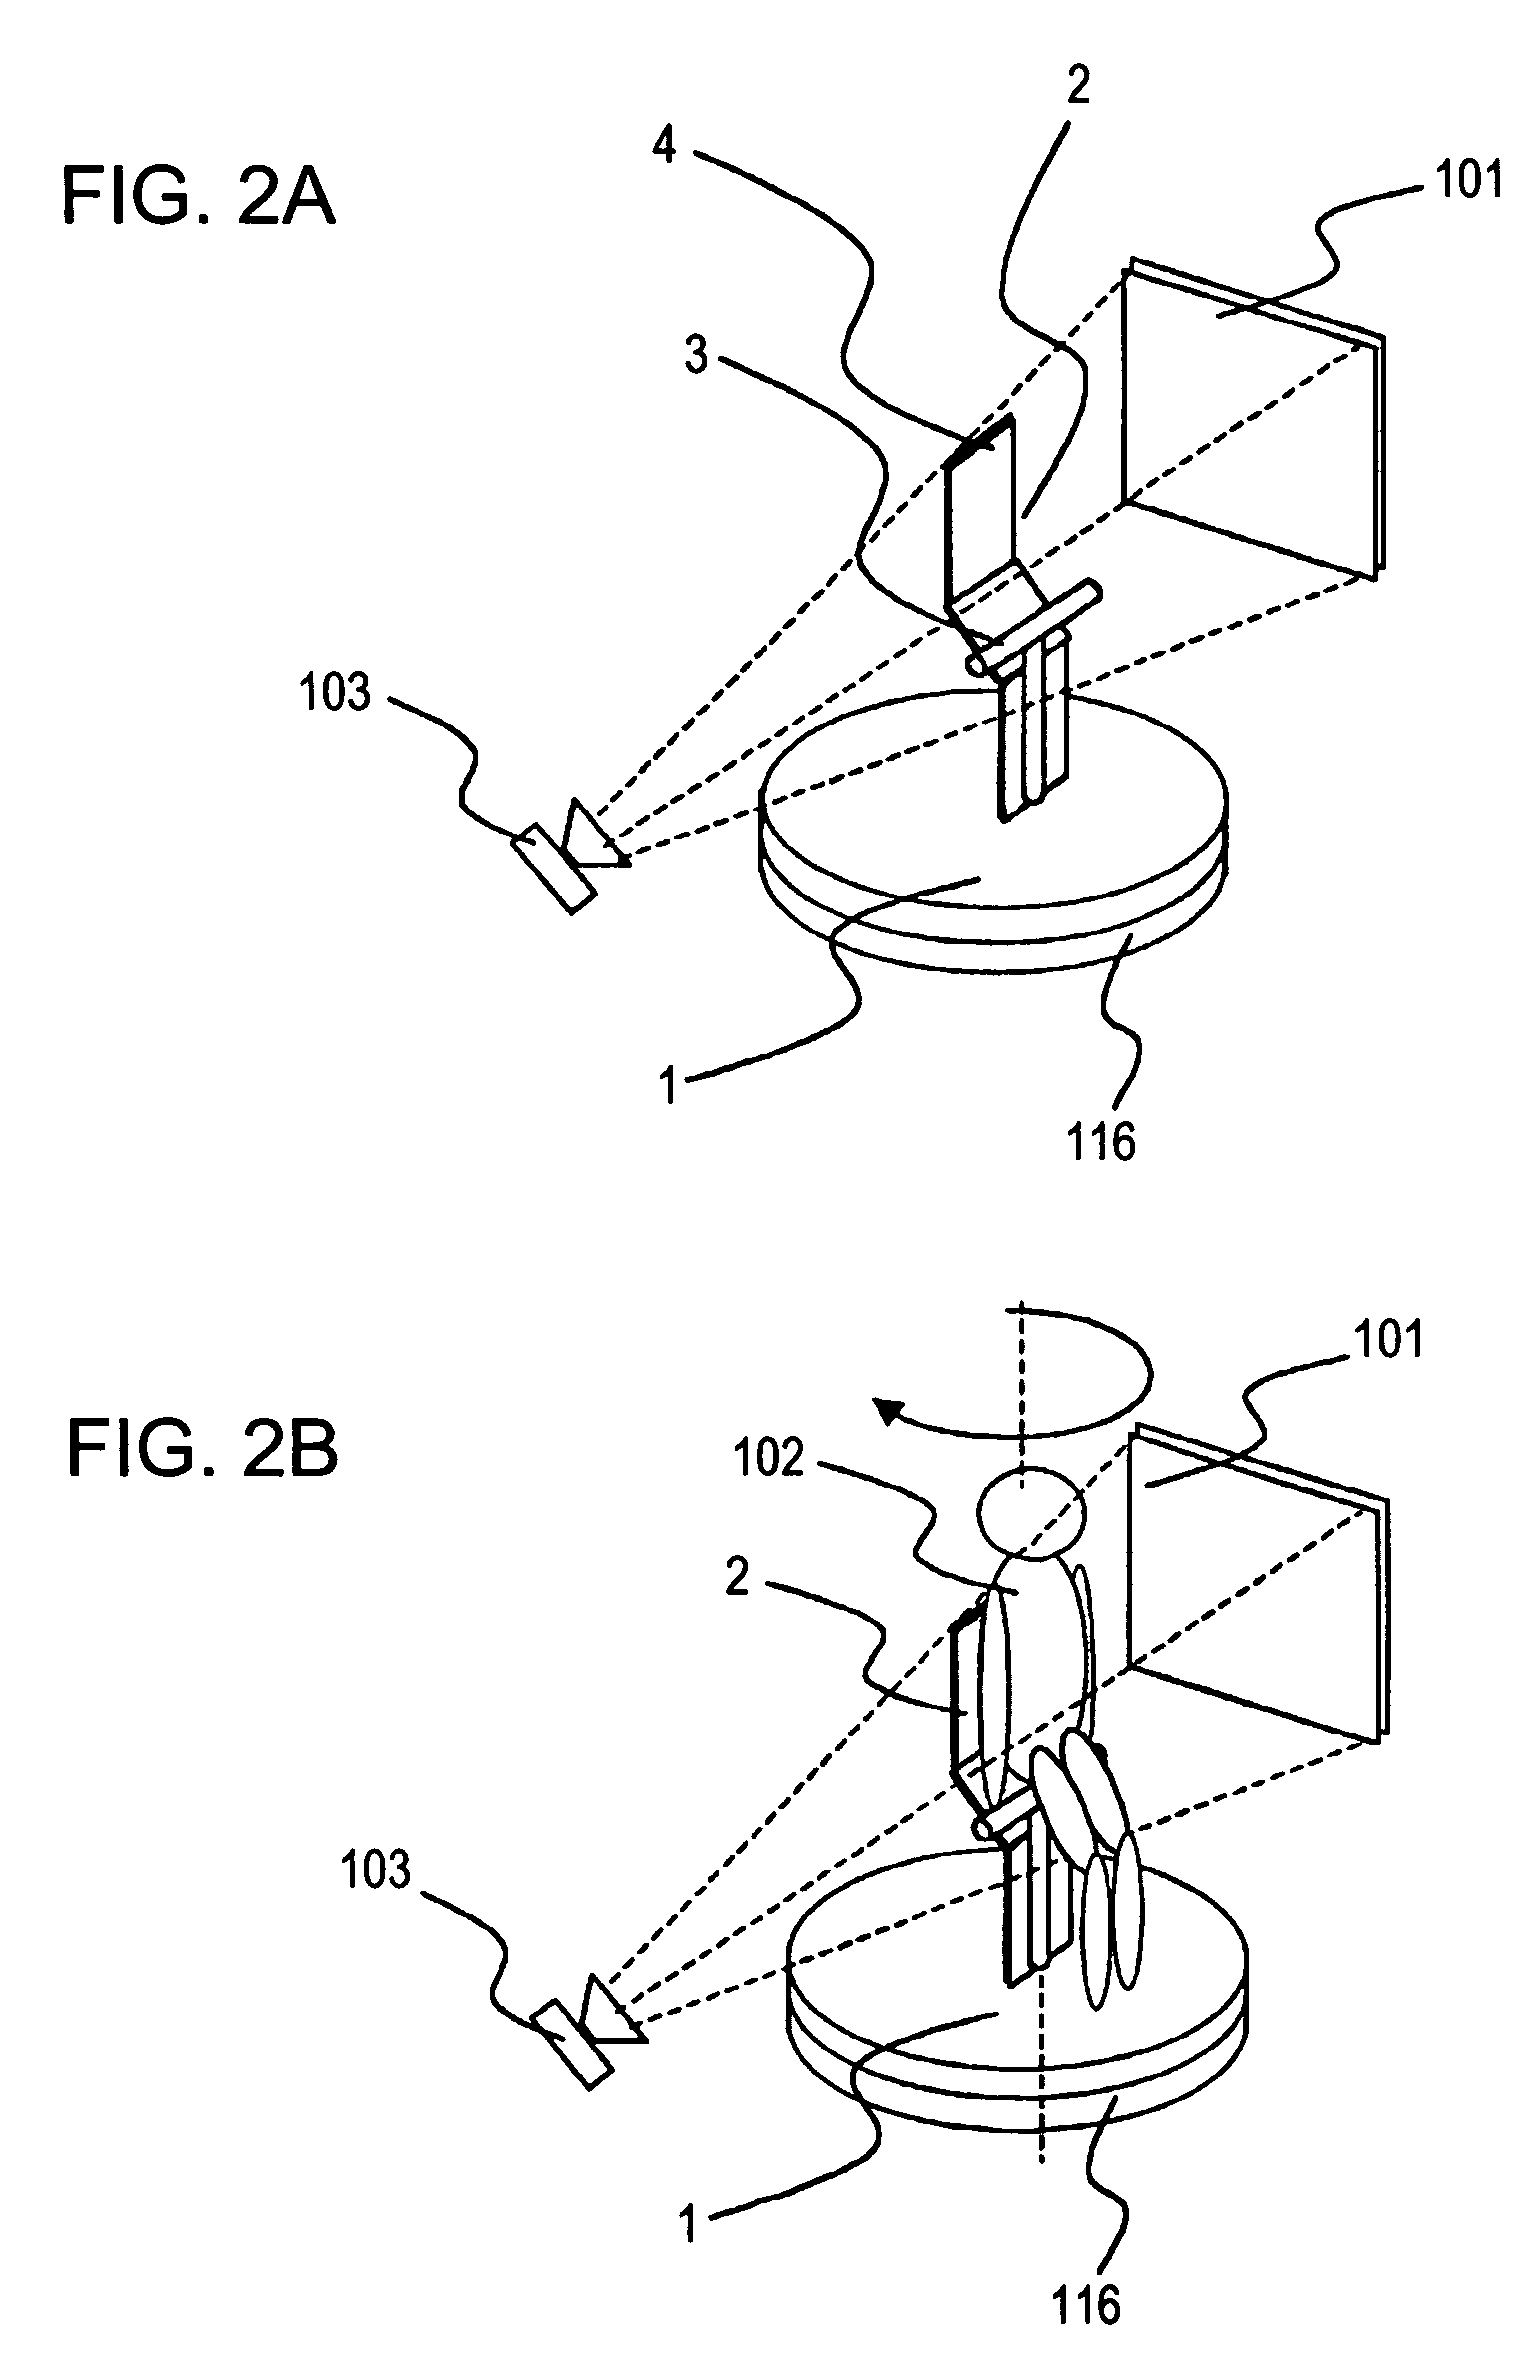 X-ray apparatus capable of operating in a plurality of imaging modes